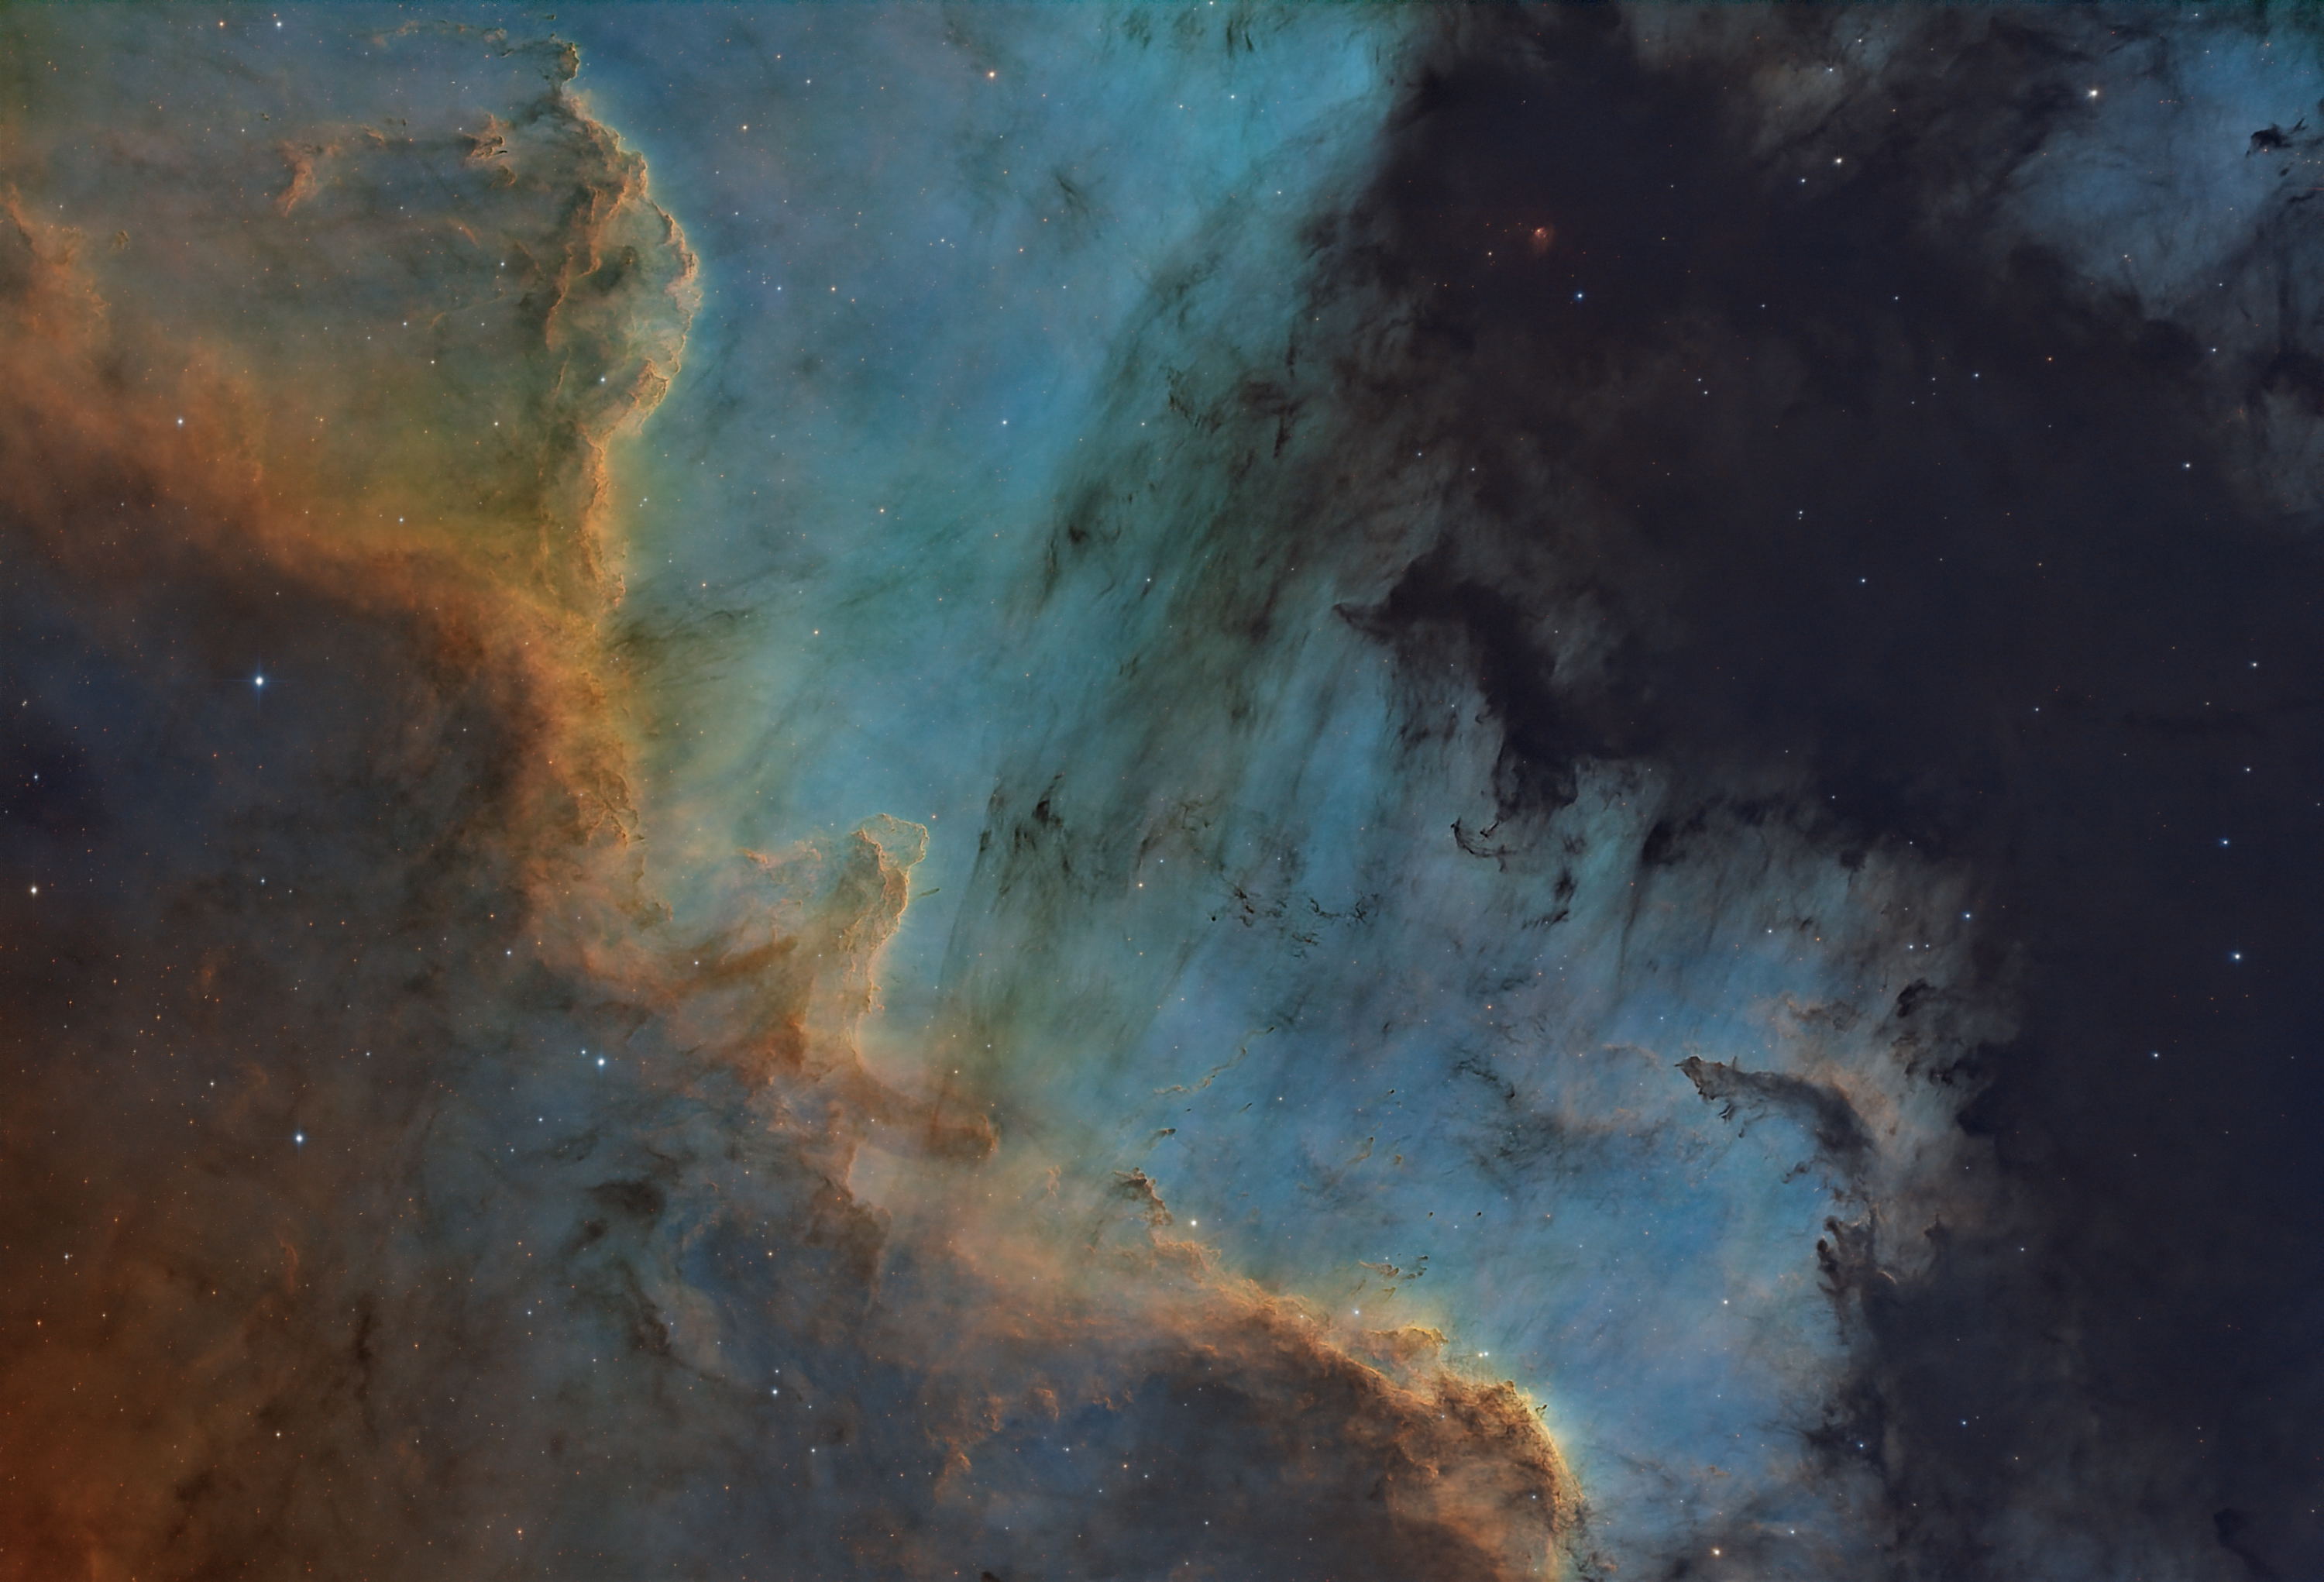 The Great Wall of Cygnus